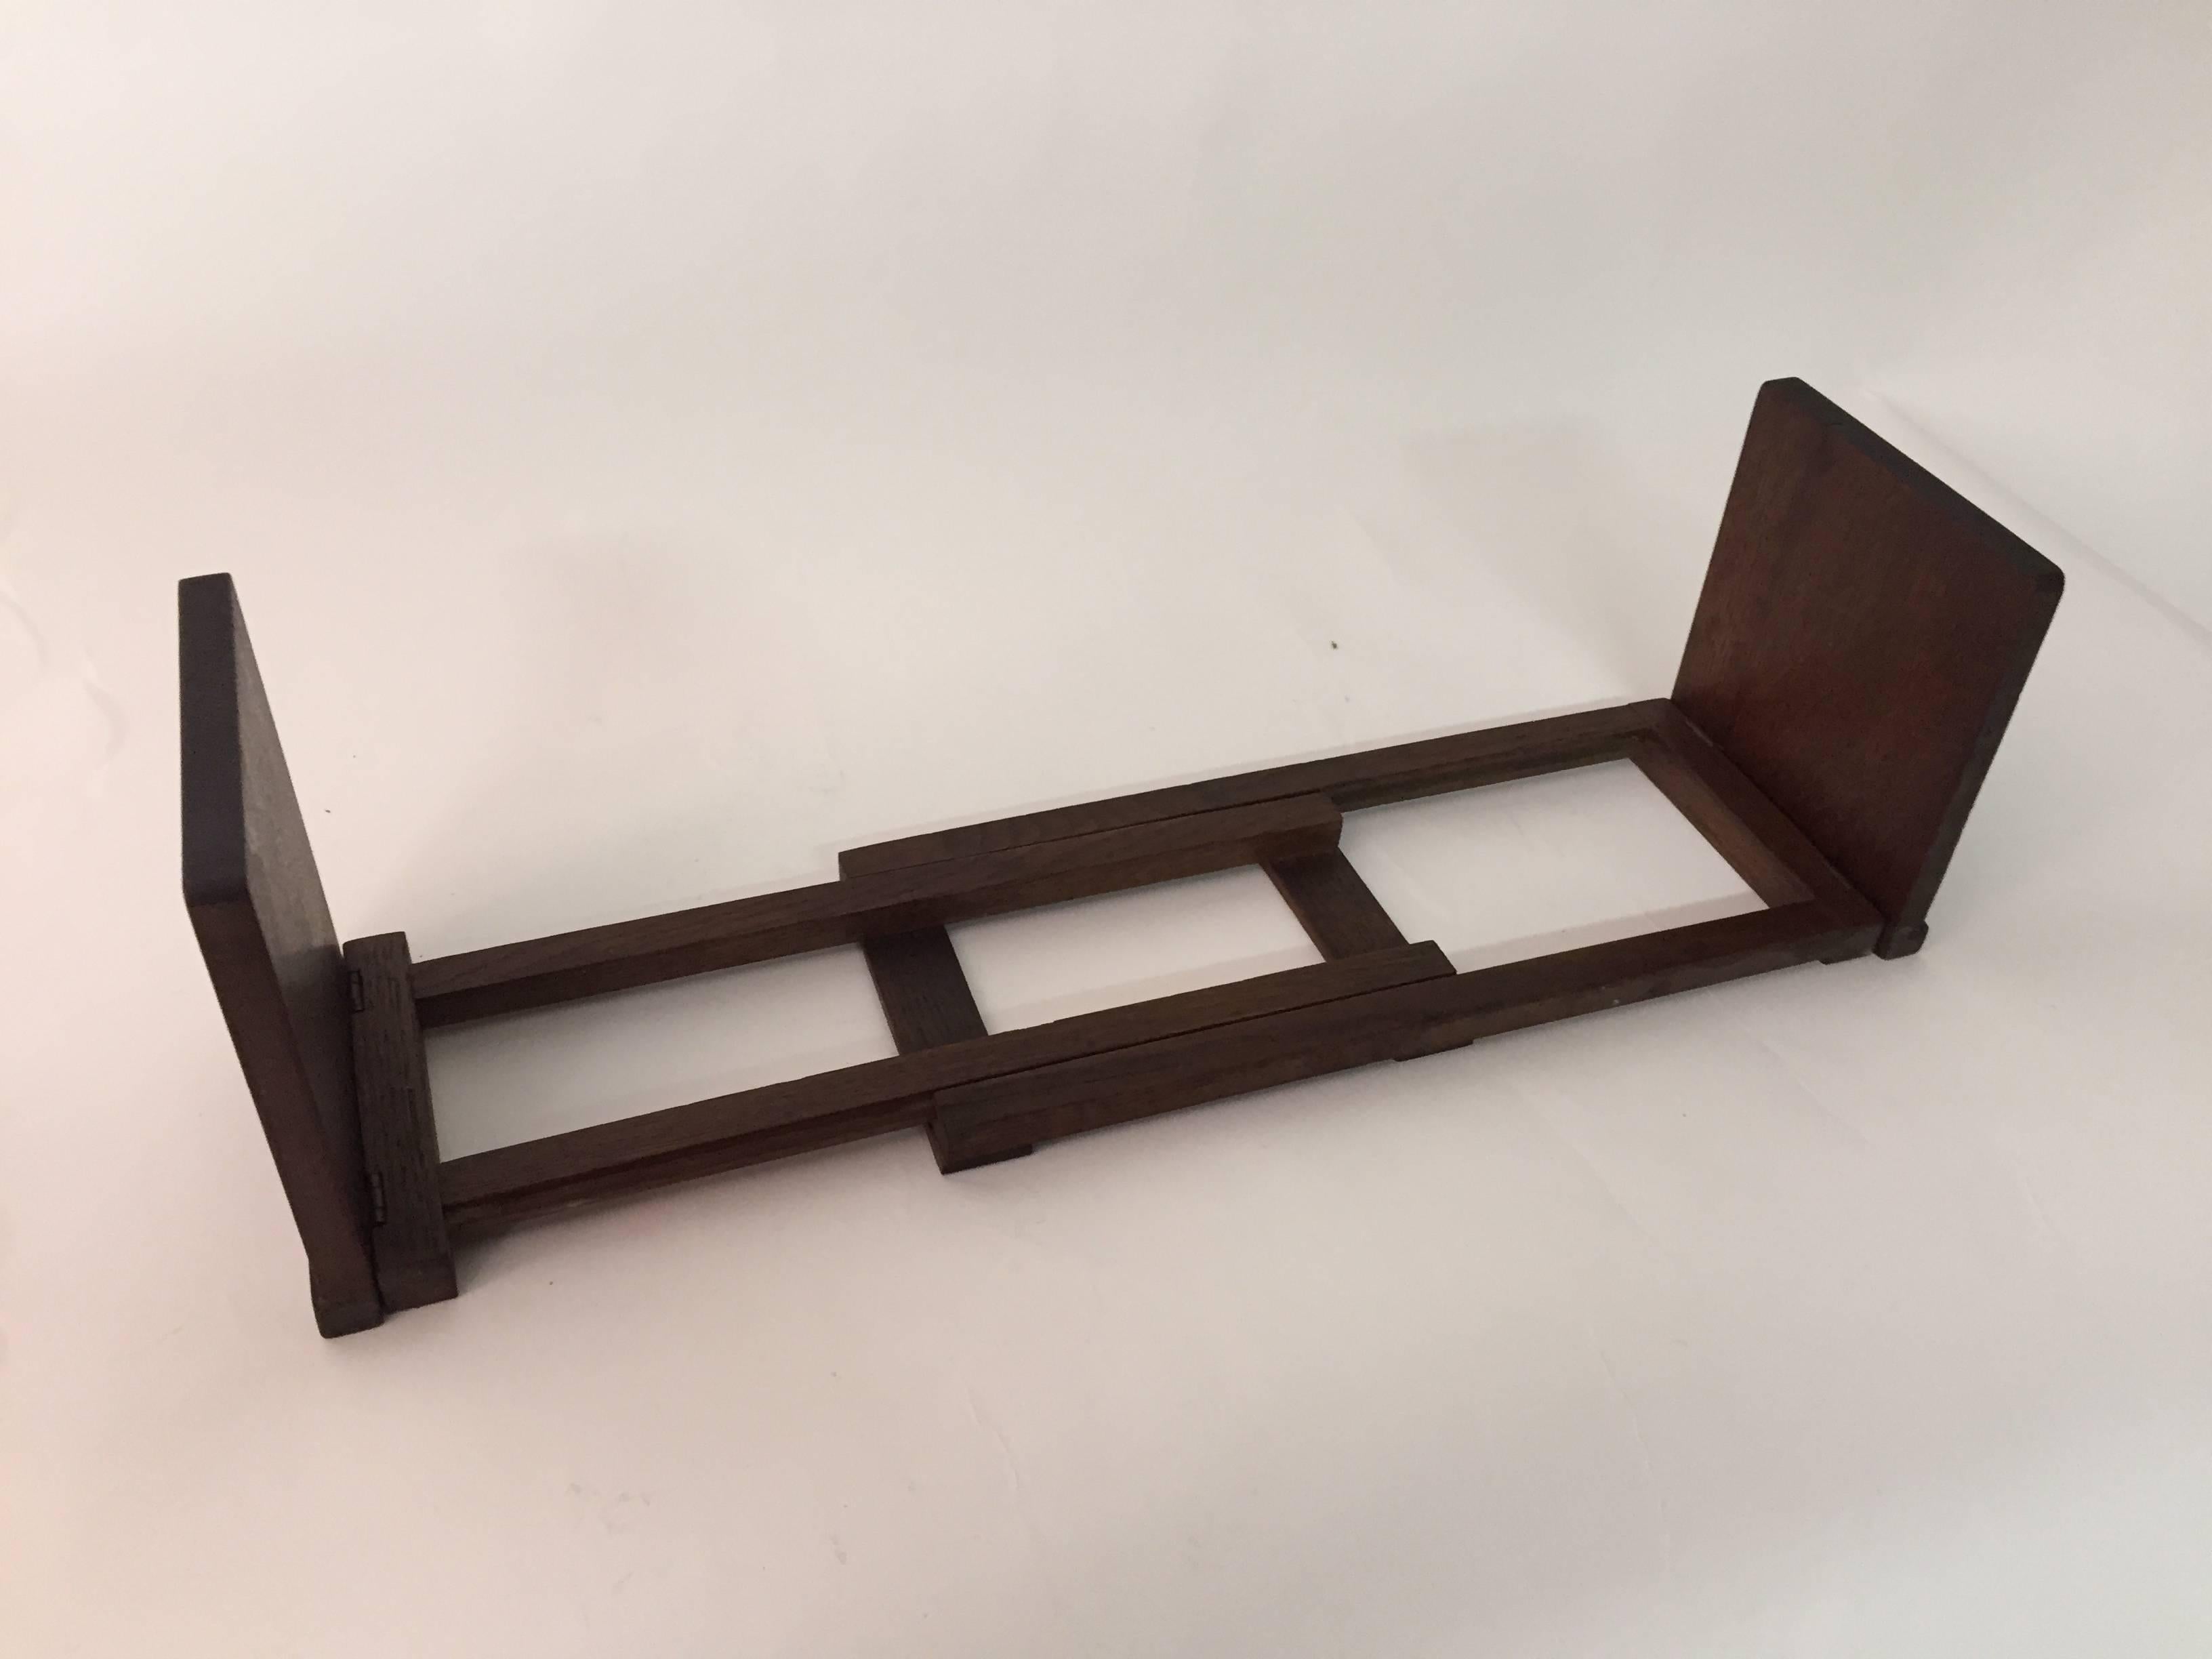 Early 20th Century American Arts & Crafts Oak and Ebony Inlay Book Stand